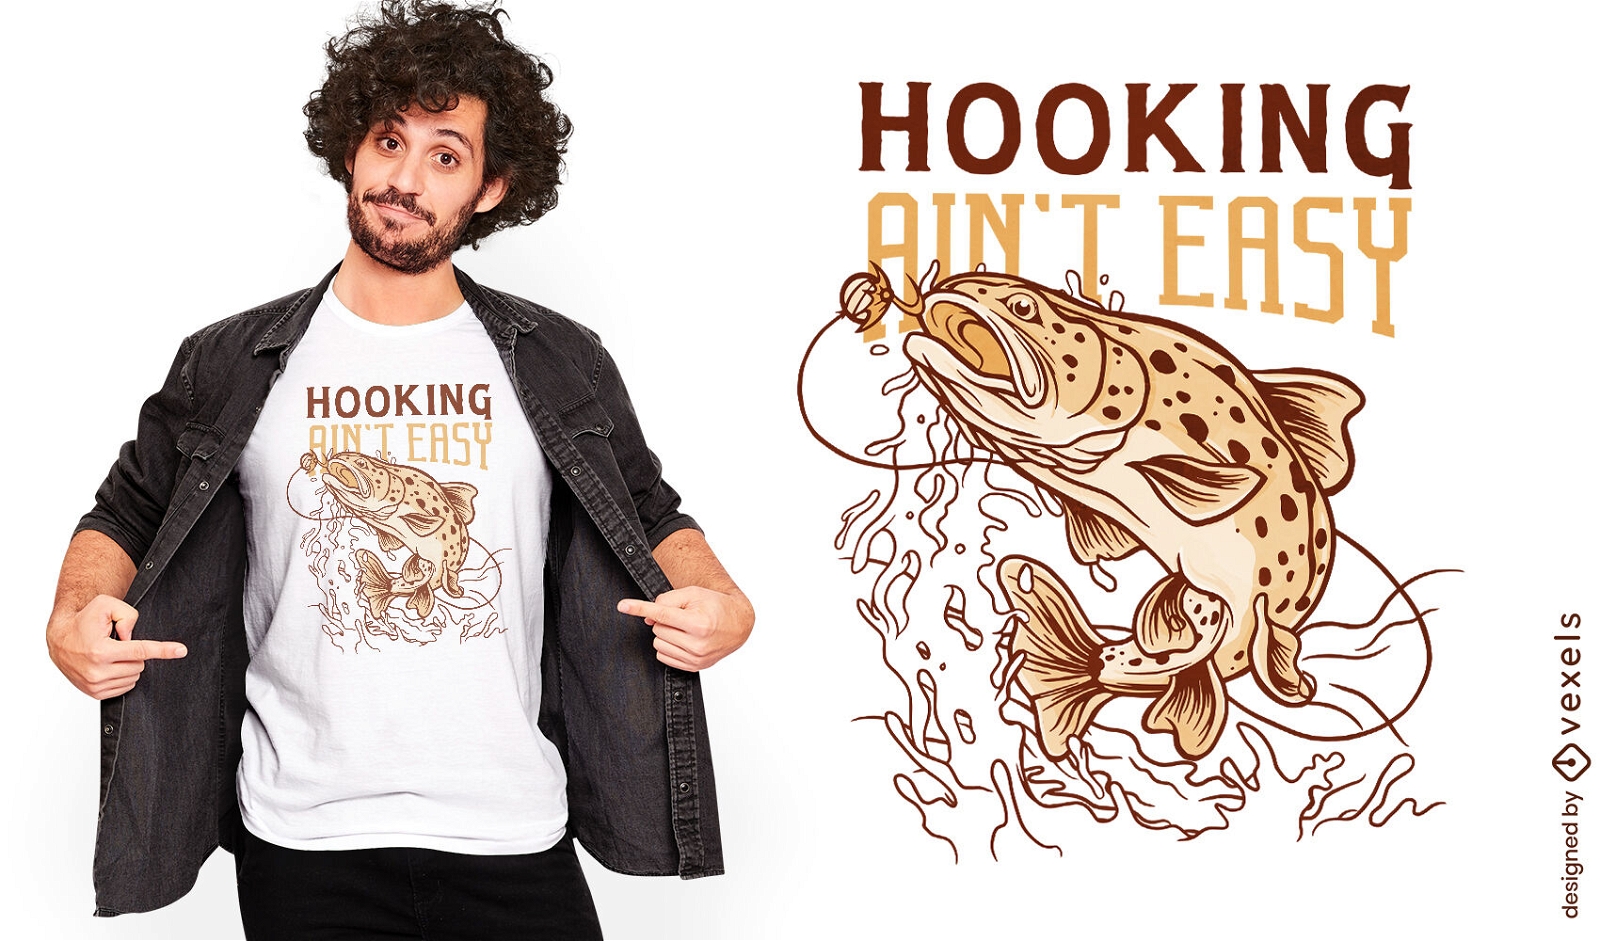 Hooking fish quote t-shirt design